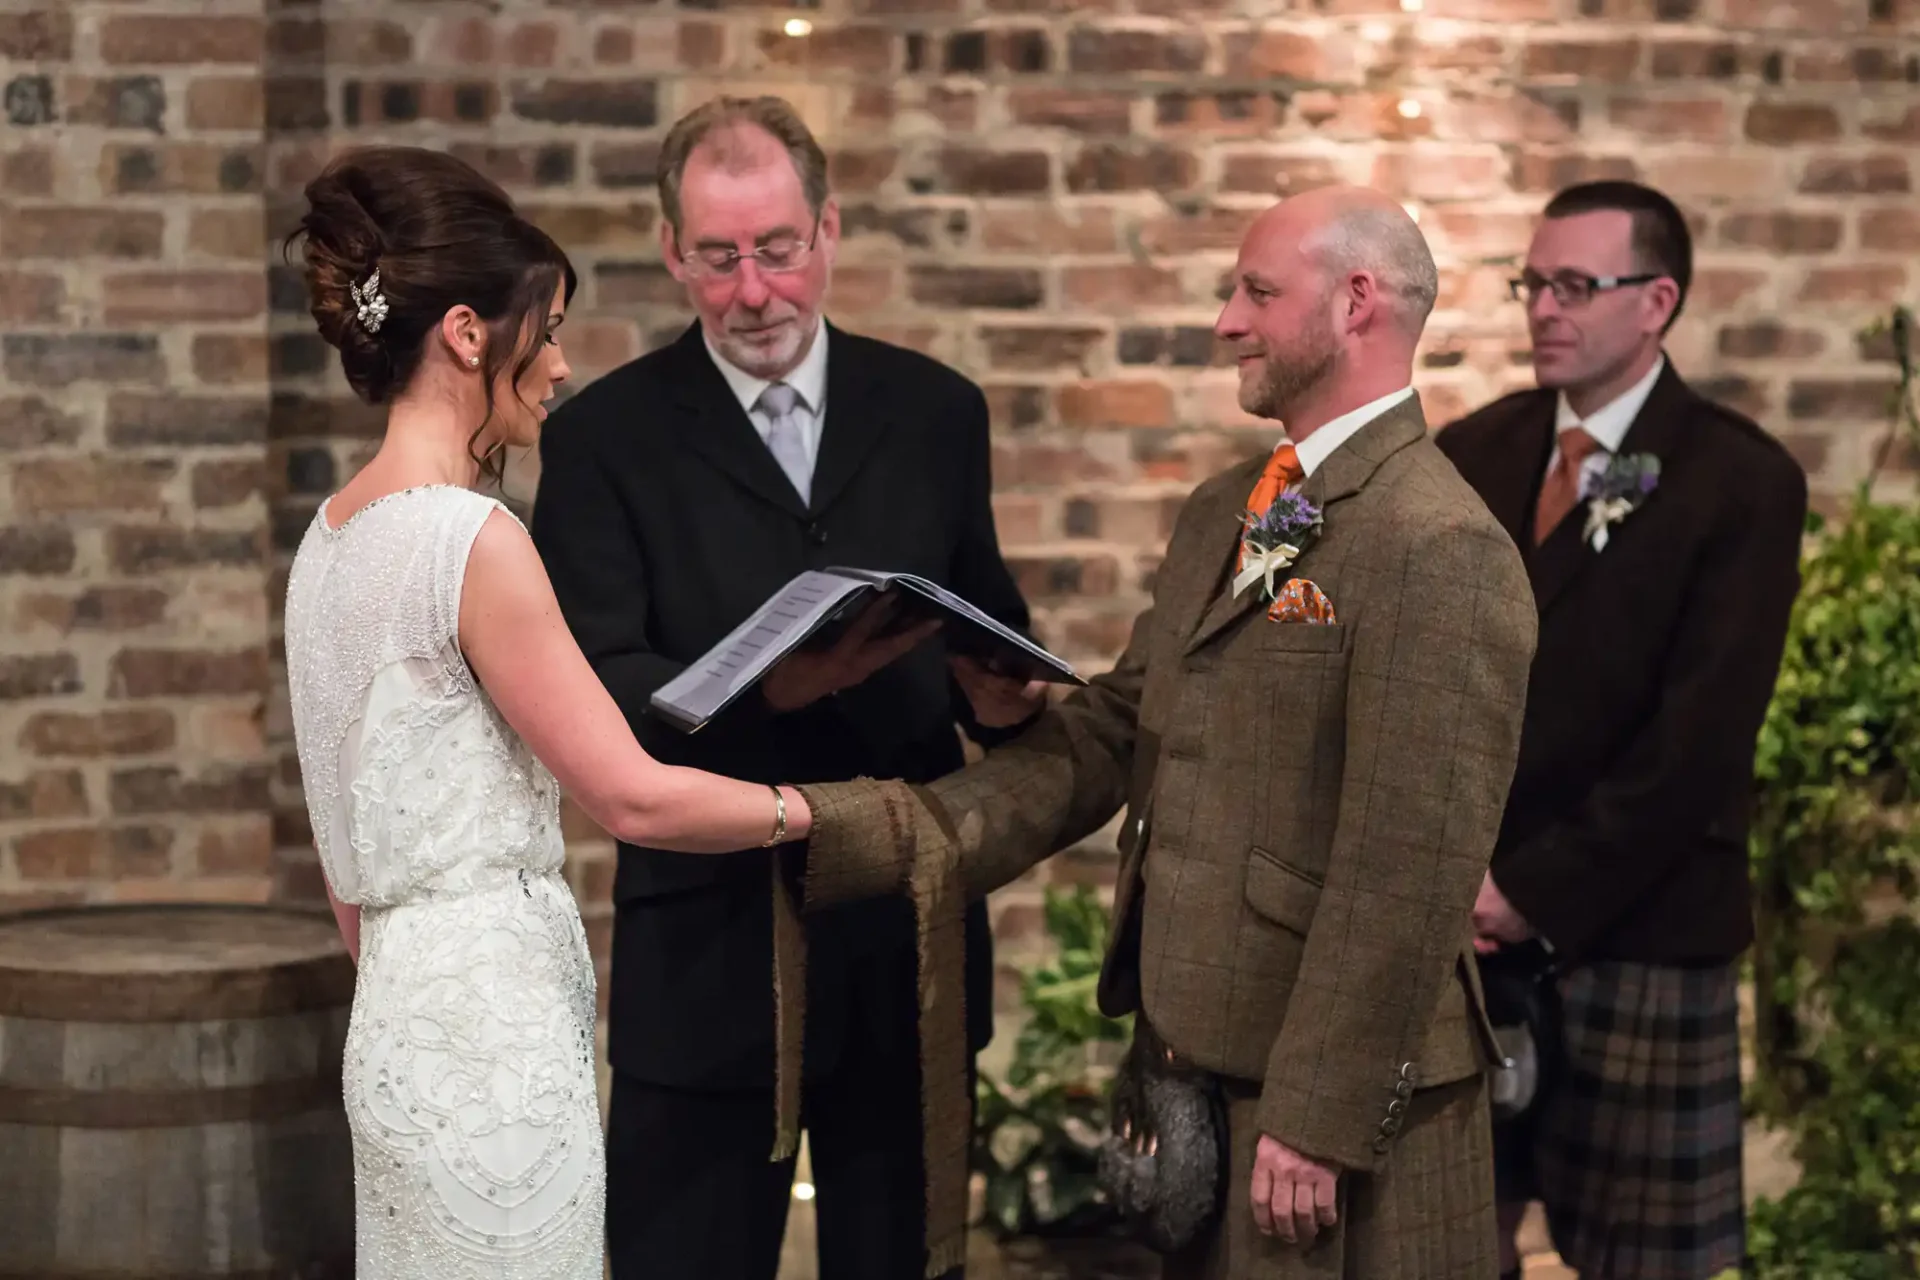 A bride and groom holding hands during their wedding ceremony, with an officiant and a best man standing beside them in a brick-walled venue.